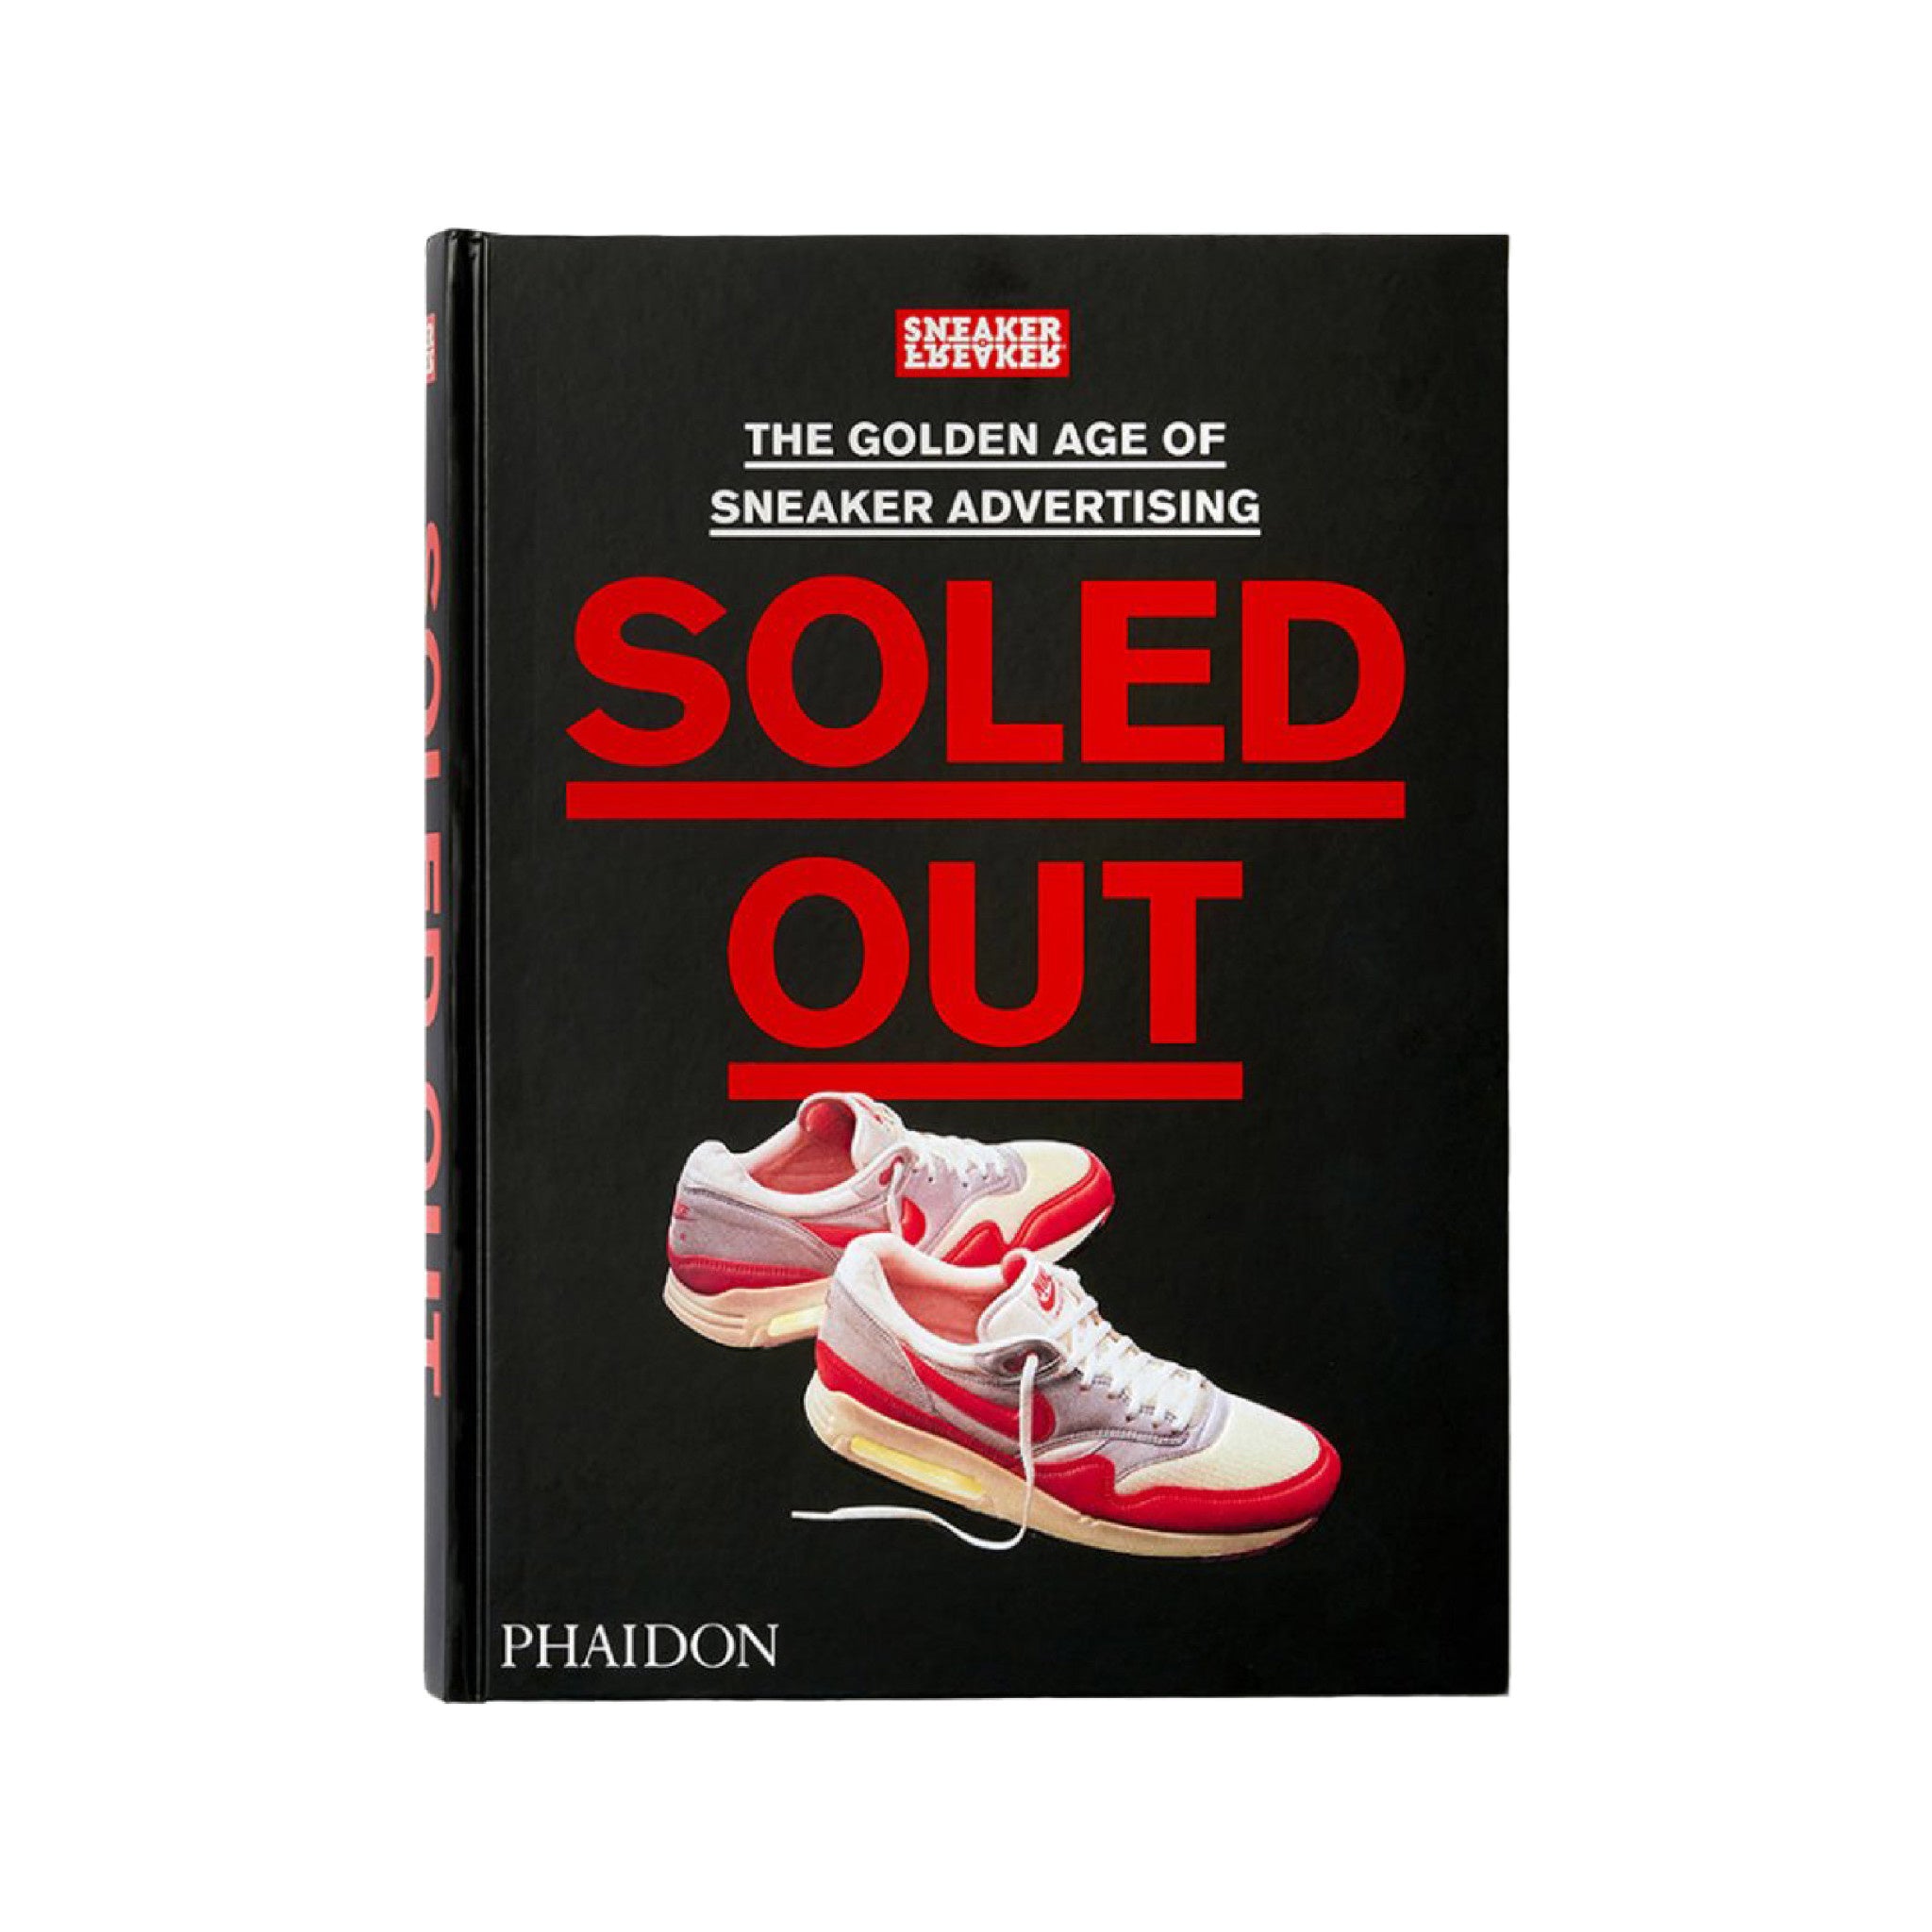 Soled Out: The Golden Age of Sneaker Advertising - Wynwood Walls Shop